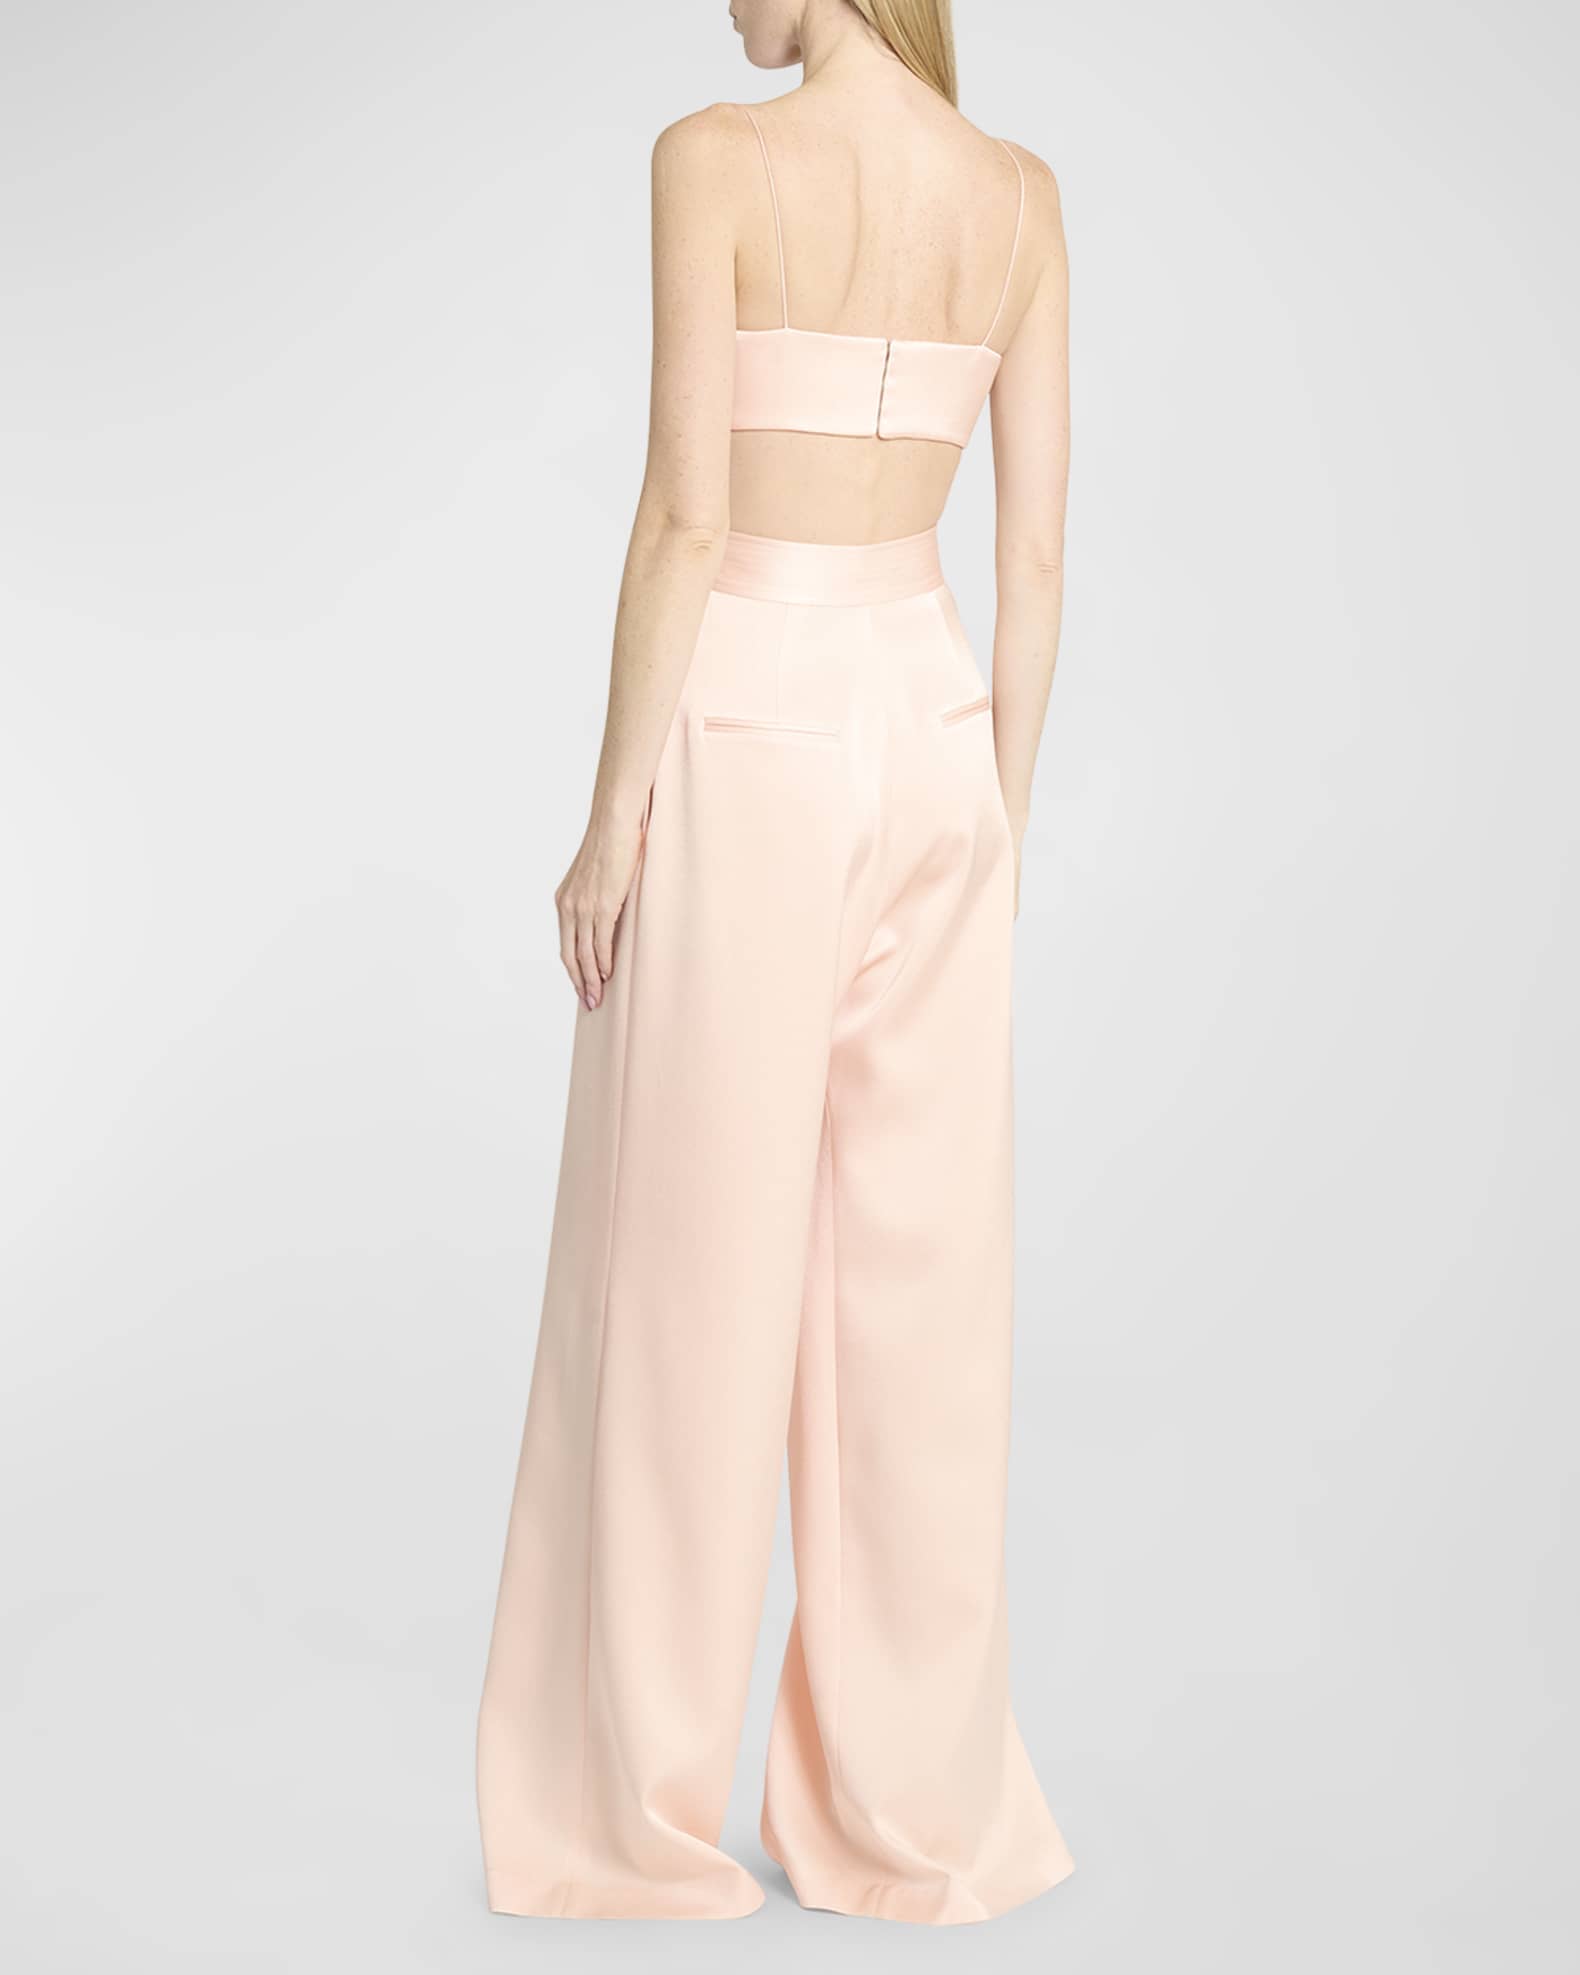 High-rise satin wide-leg pants in white - Alex Perry